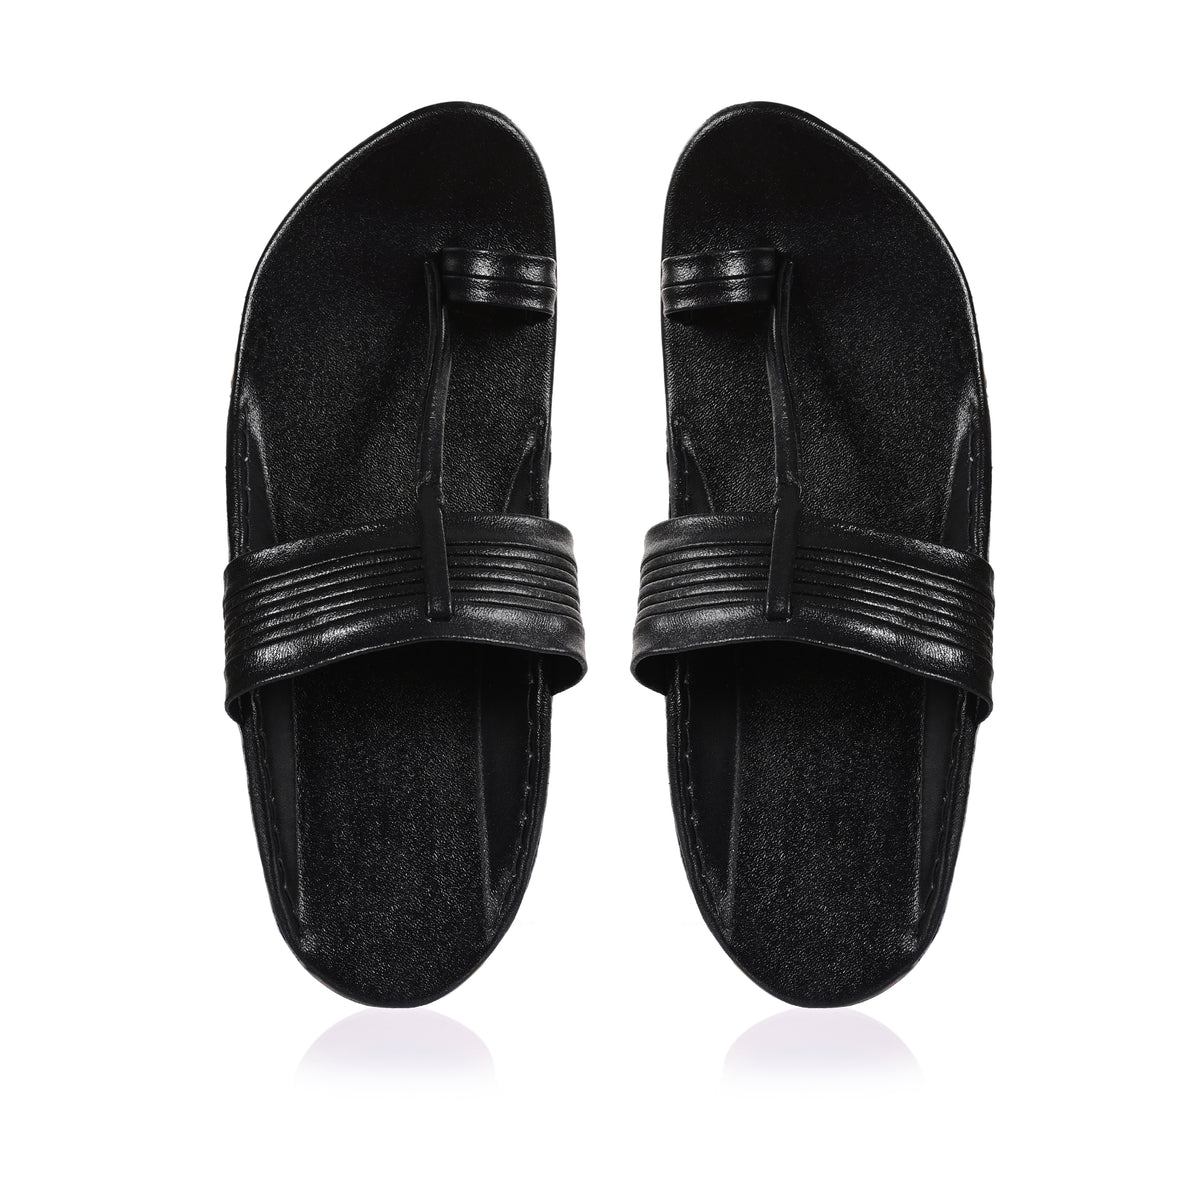 Black Leather Chappal/Slippers for Men